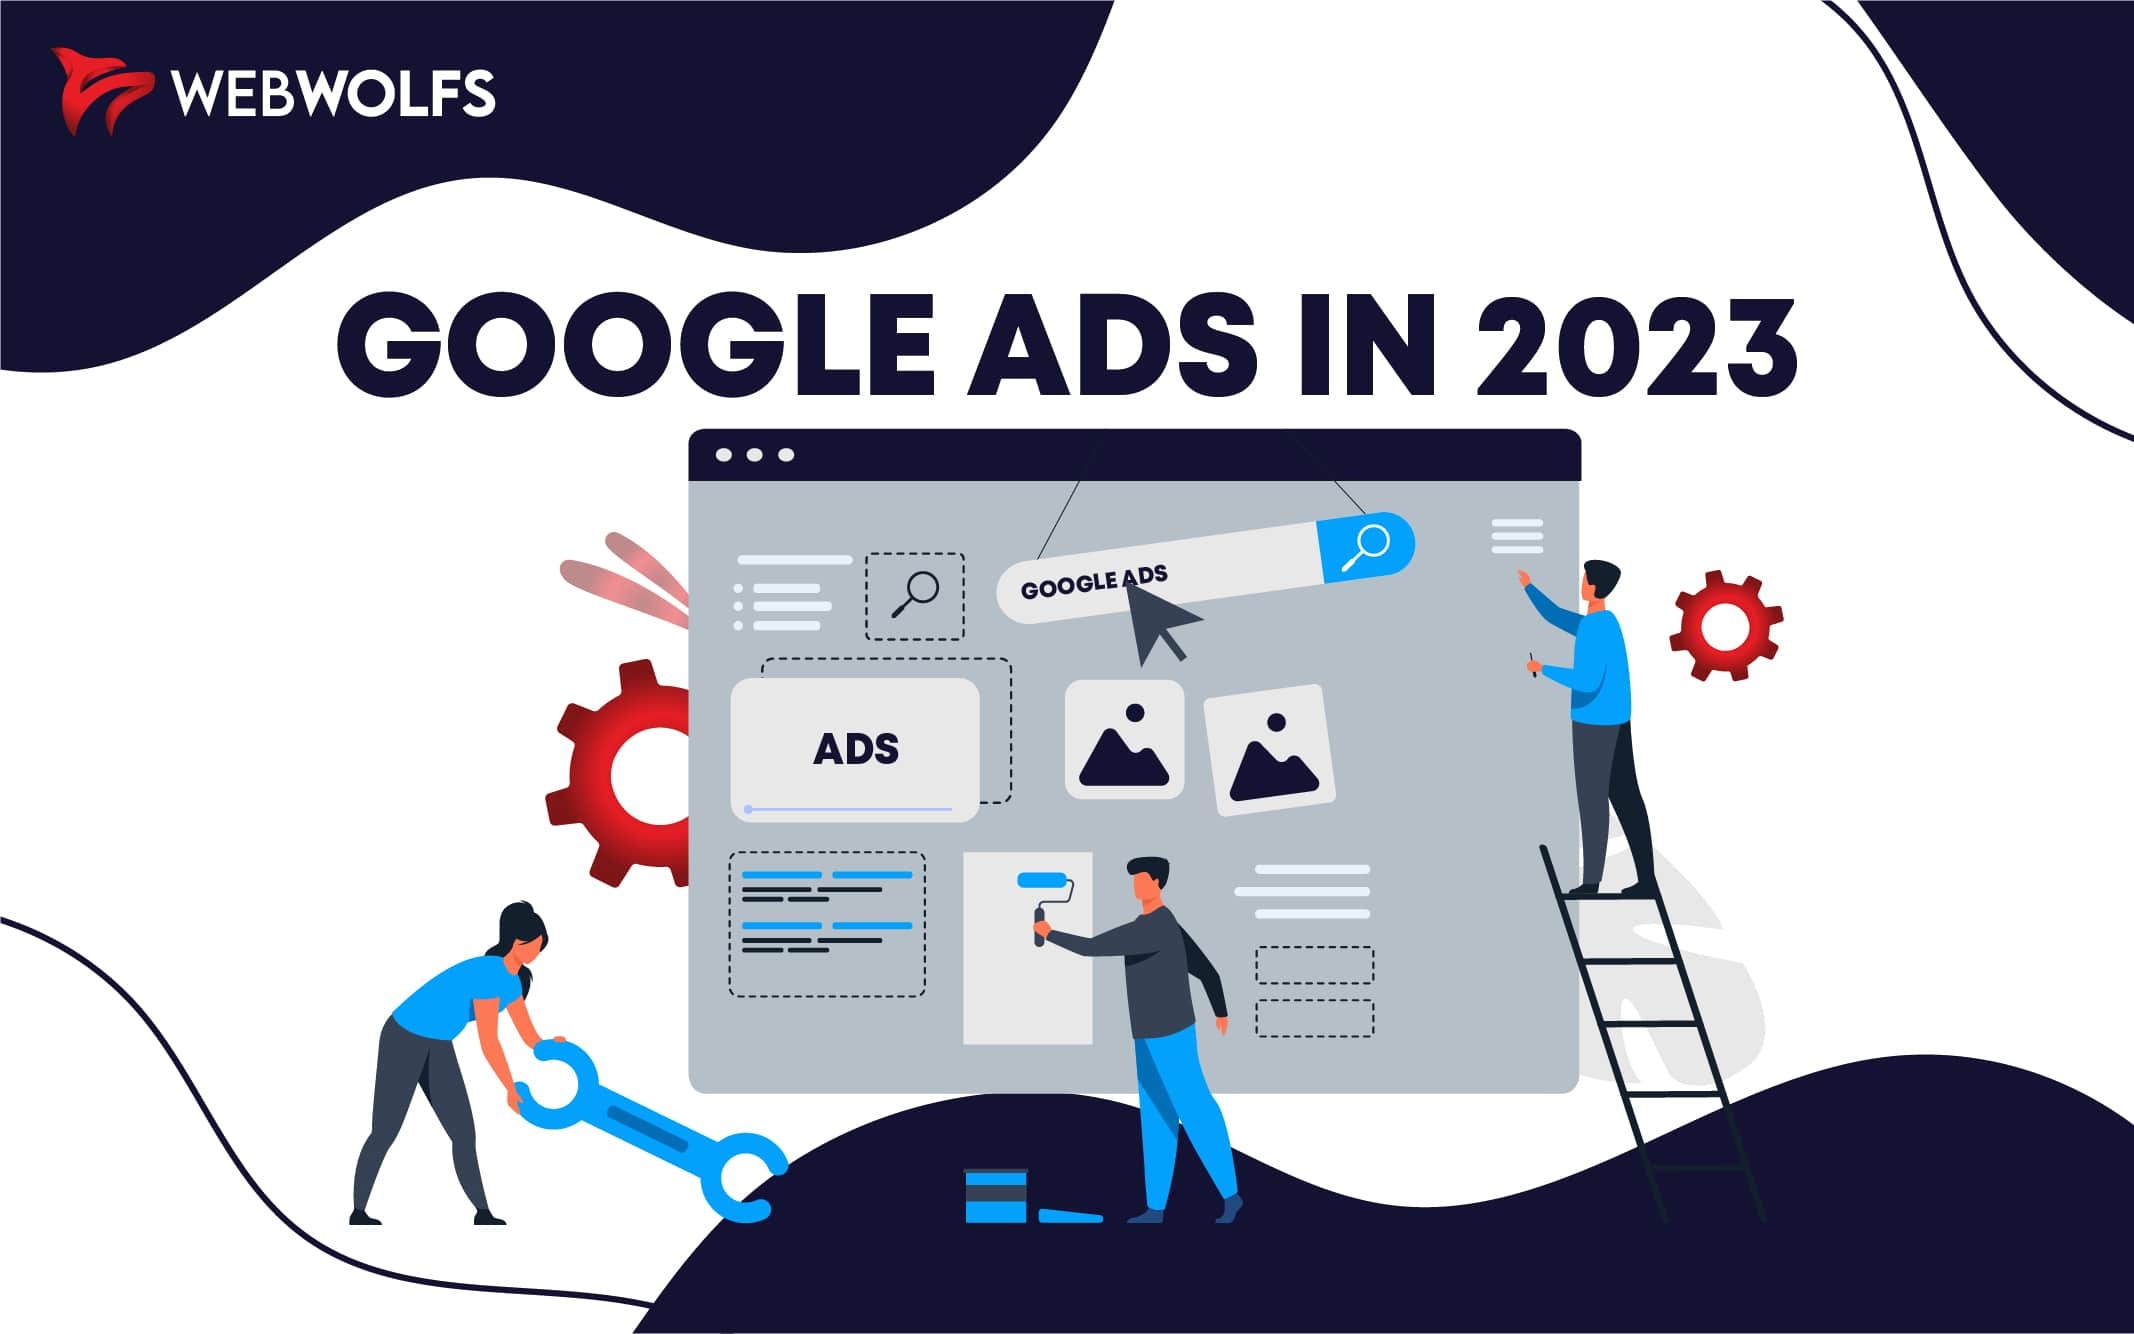 How to Run Google Ads in 2023: Step-by-Step Guide